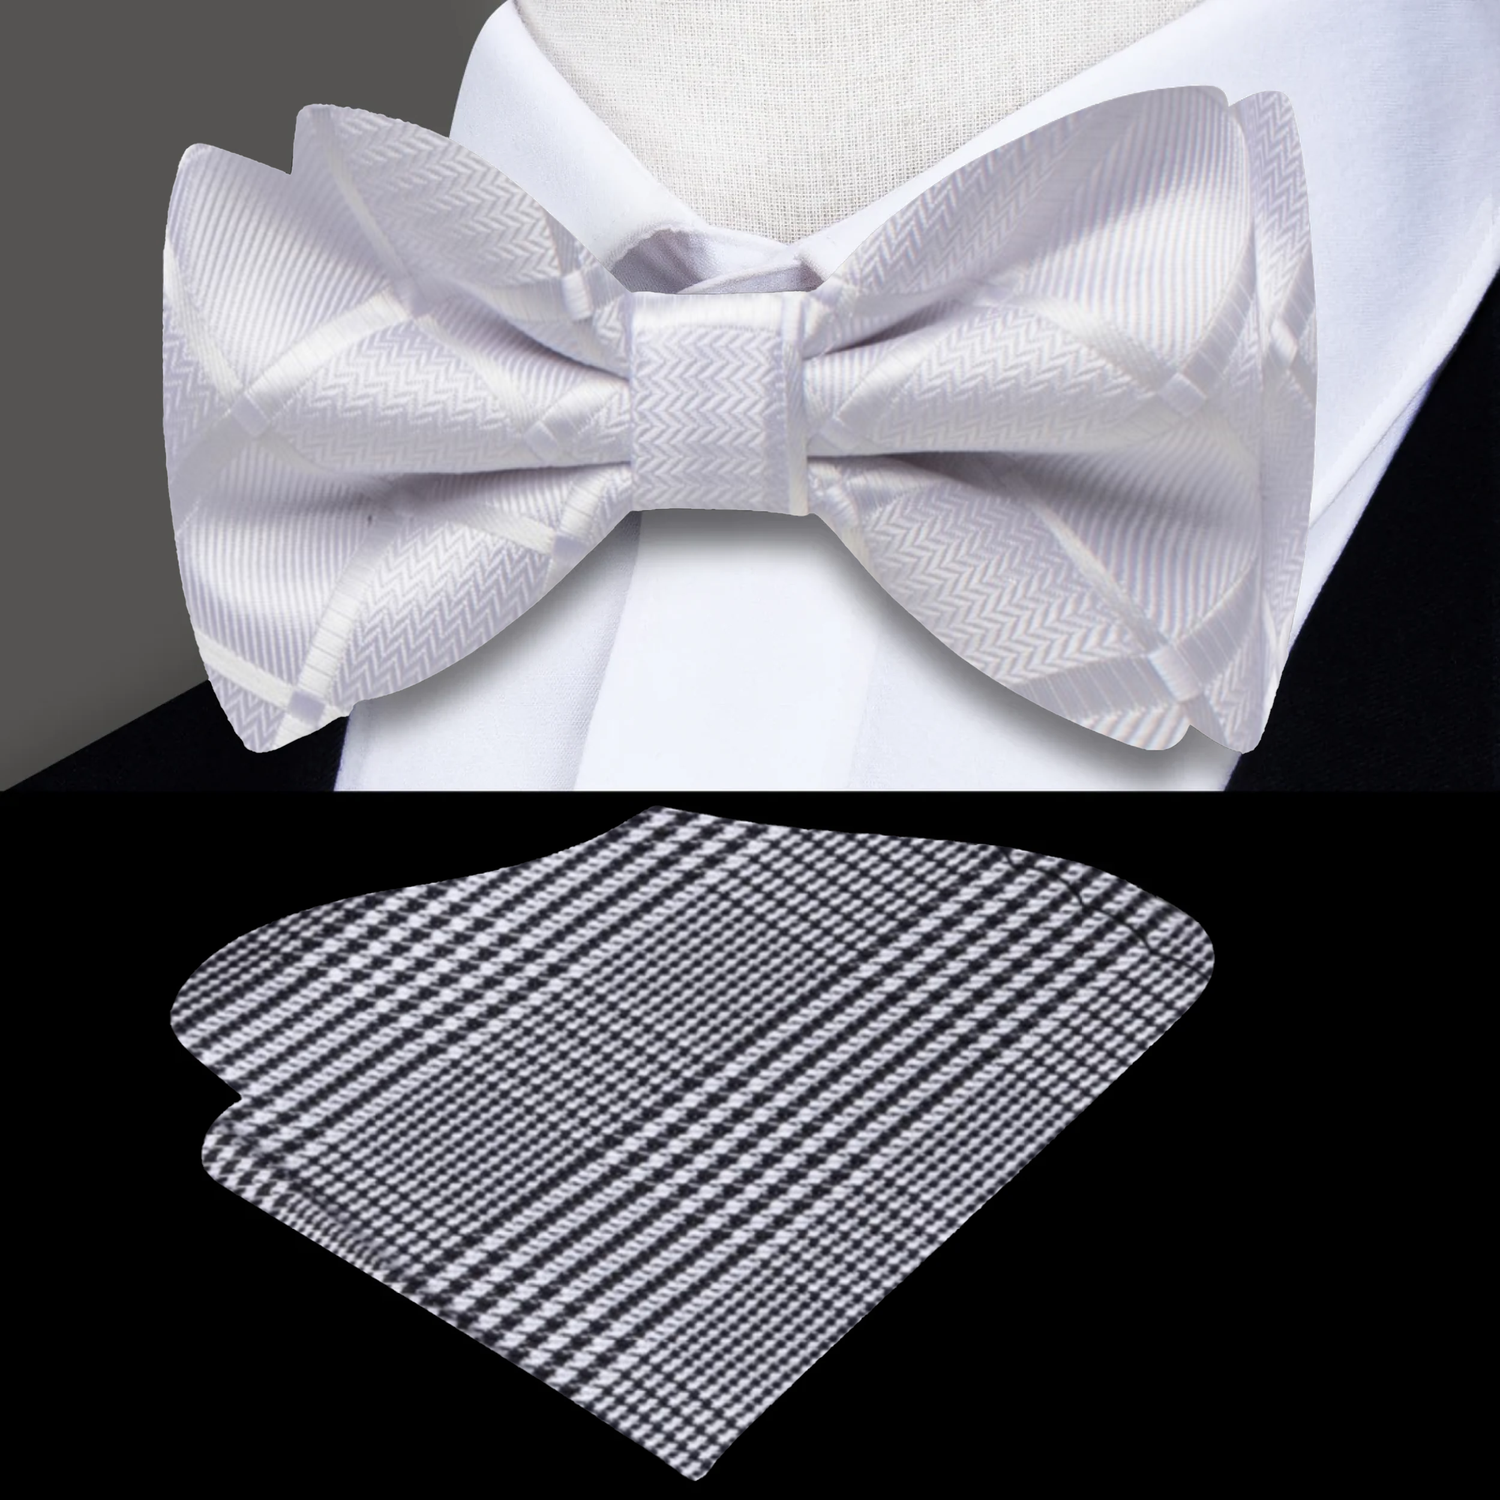 White With Geometric Texture Bow Tie and Accenting Pocket Square